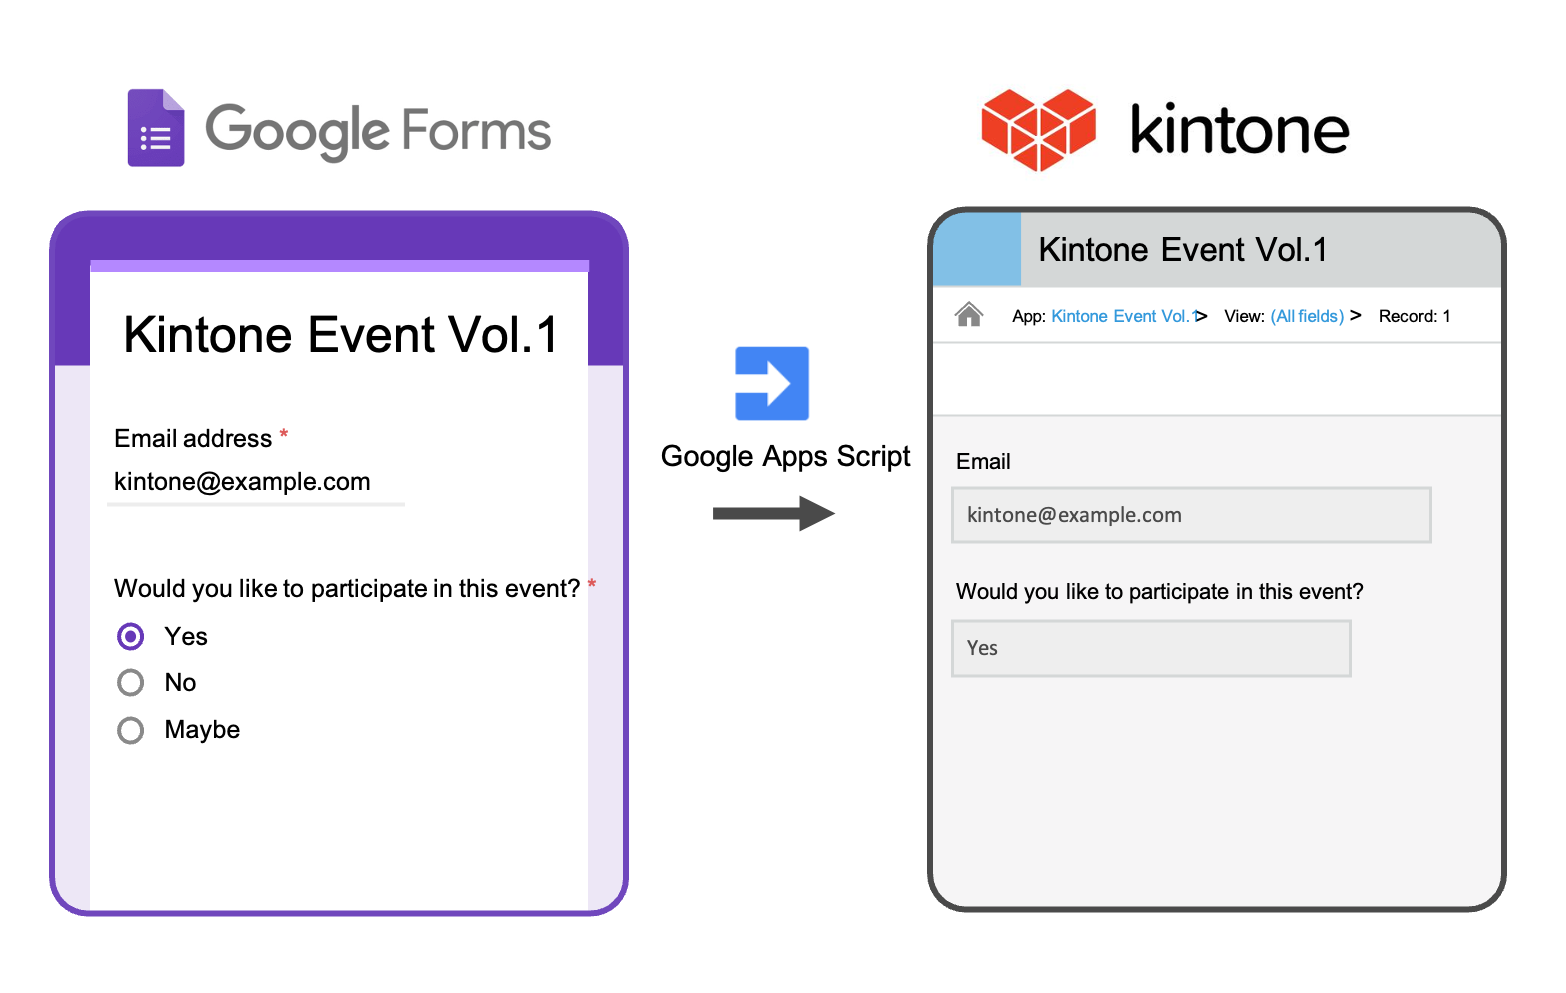 IMAGE: Send Google Forms Submissions to Kintone